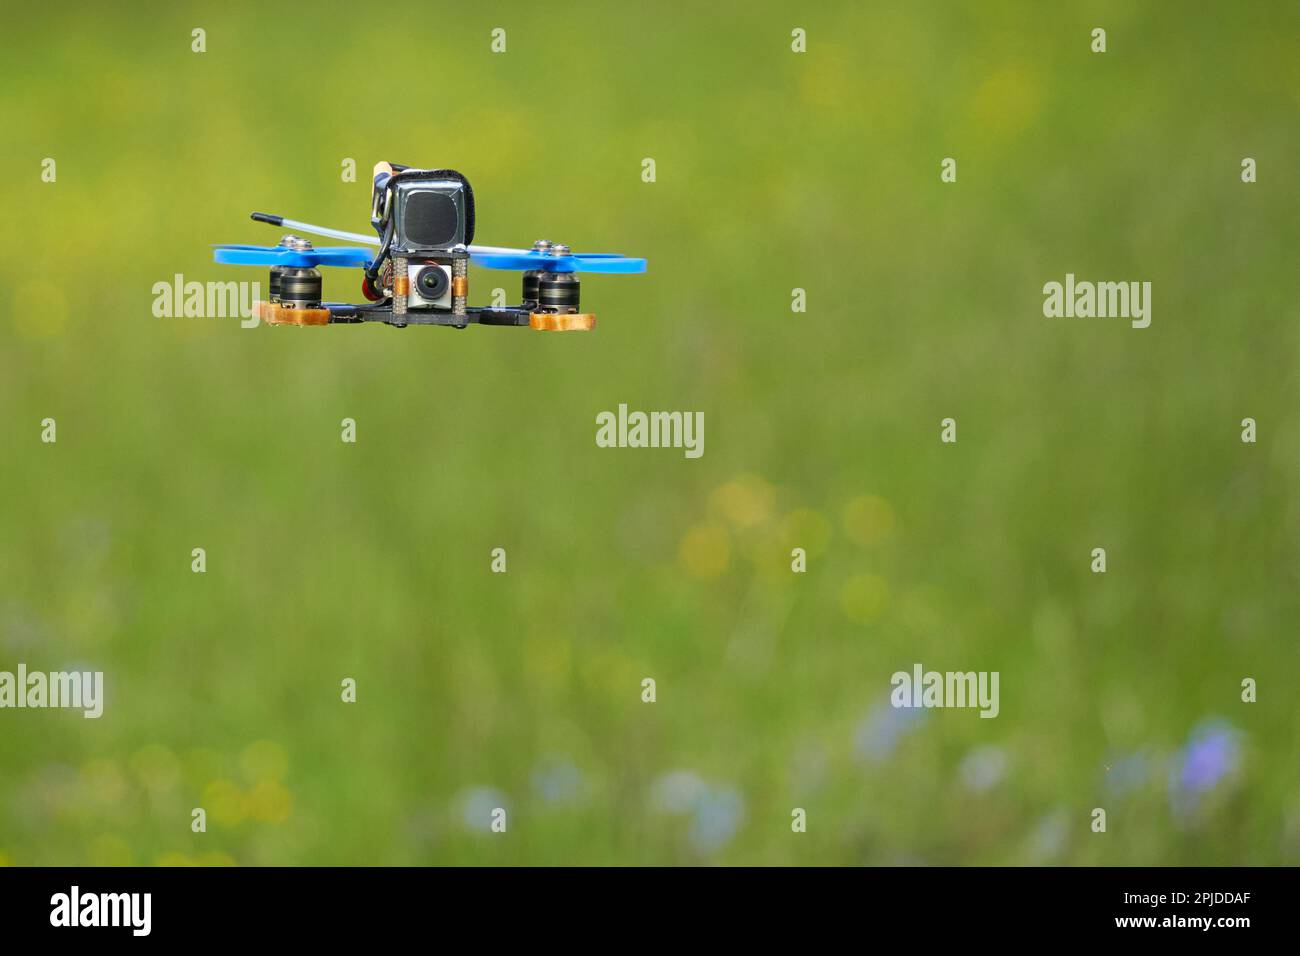 Small racing copter also drone with blue propellers and black battery over a green meadow with colorful flowers. Front view. Depth of field. Stock Photo